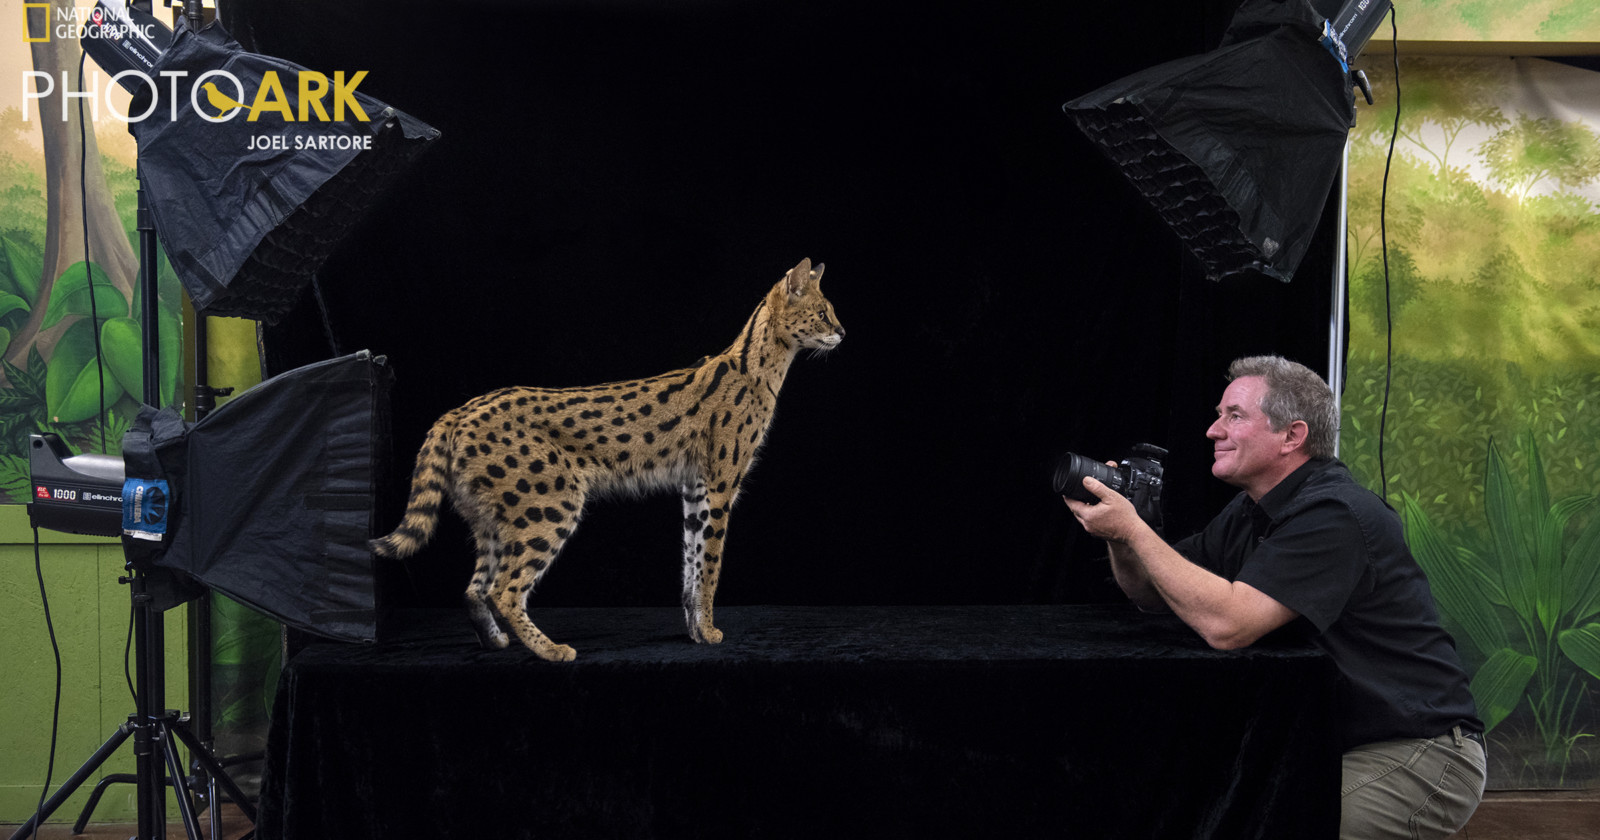 Photo Ark: A Photographers Mission to Capture 20,000 Animal Species